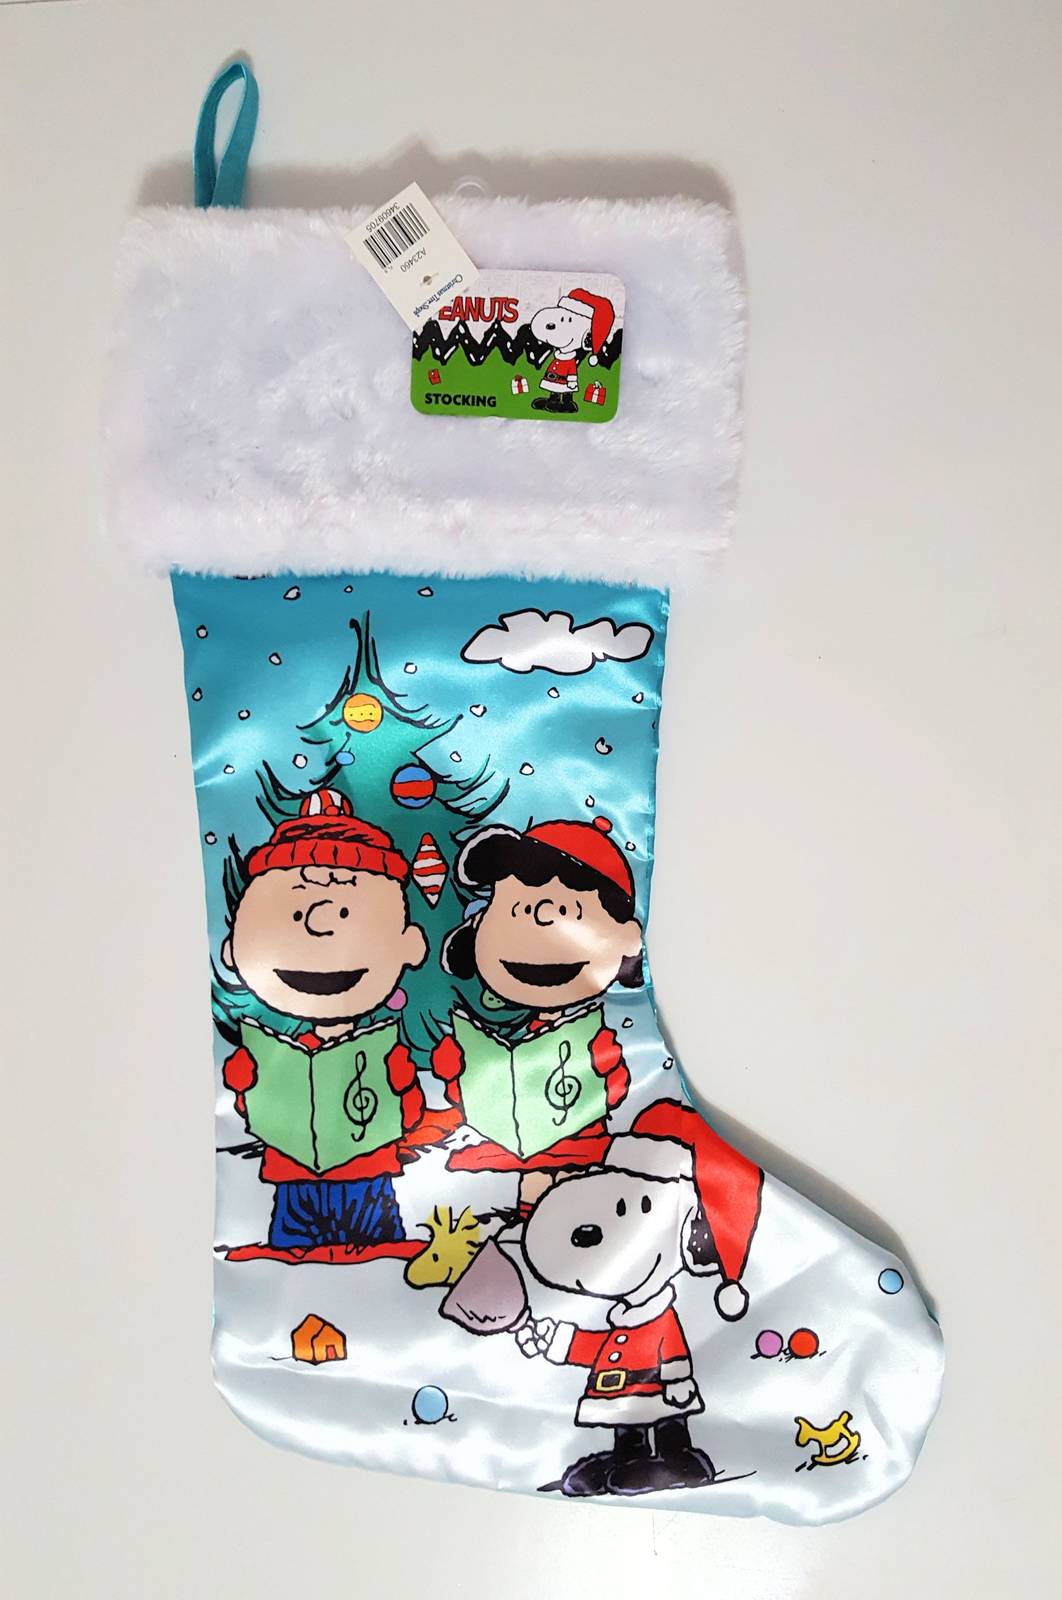 NEW Peanuts Snoopy and Friends Christmas Stocking 18" Satin - $18.99